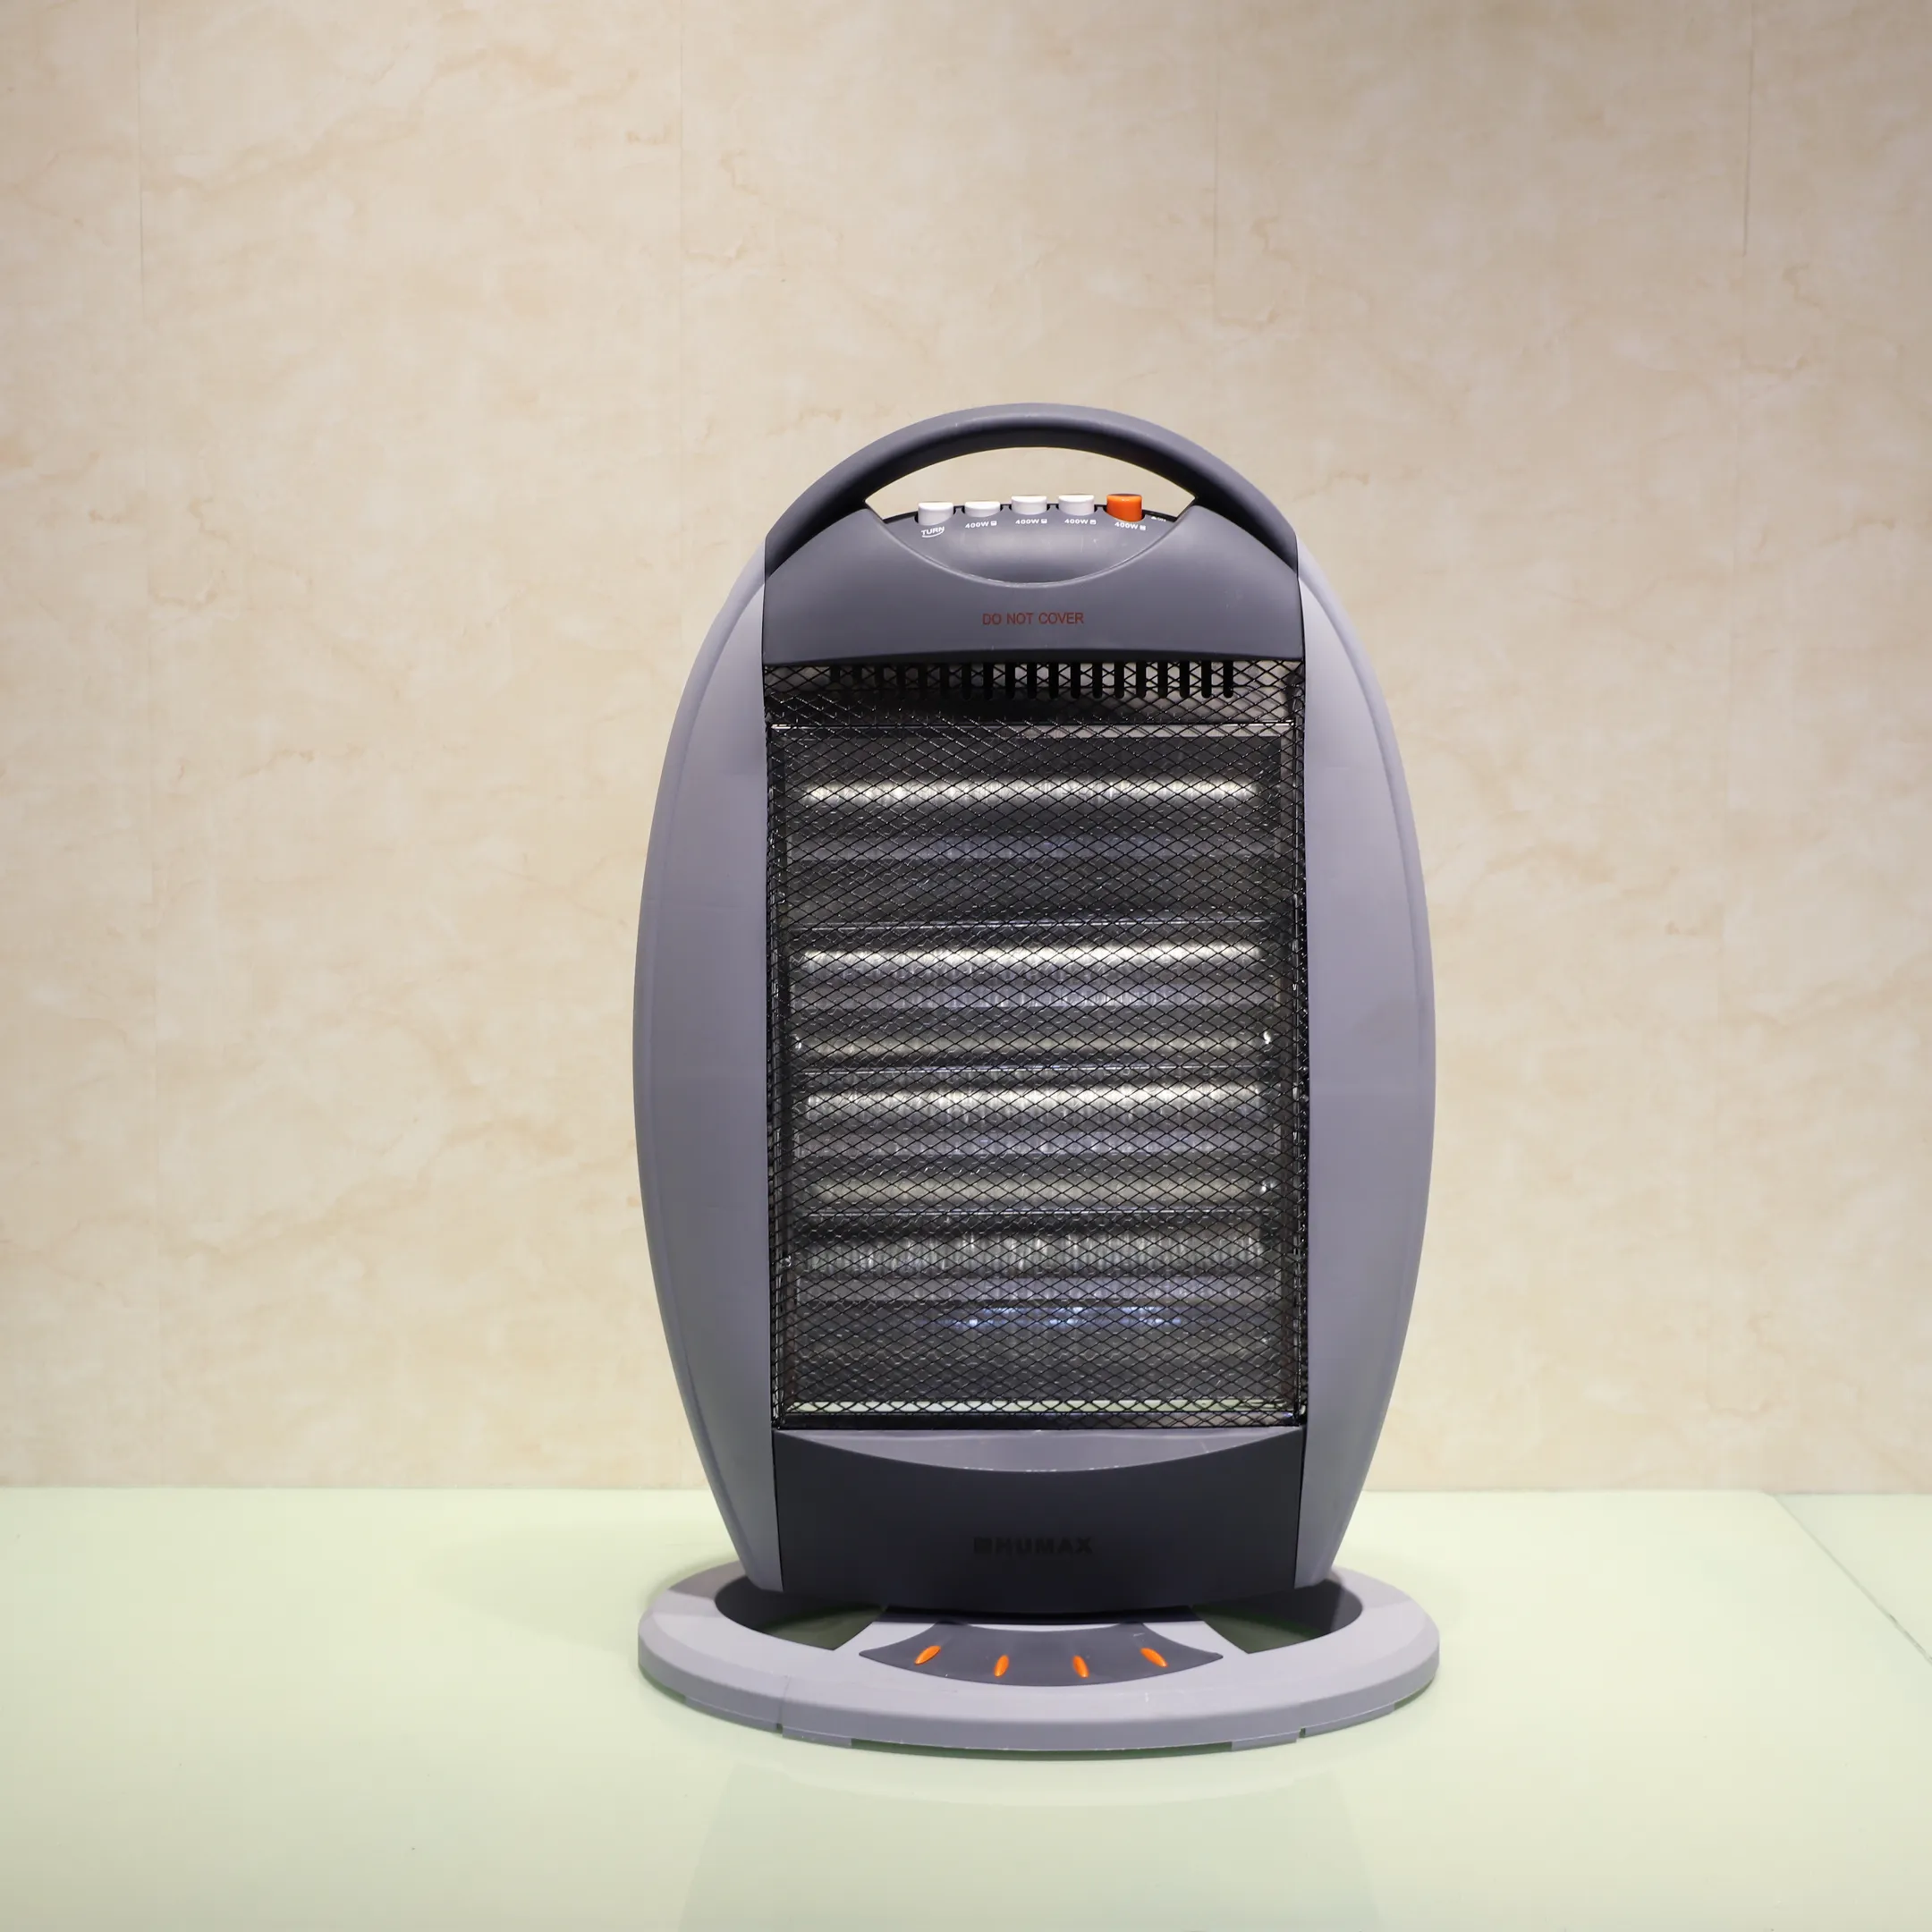 INDIA MARKET HOT SELLING 1200W HALOGEN HEATER FOR HOME APPALIANCE ELECTRIC HEATER AND ROOM HEATER BLOWER